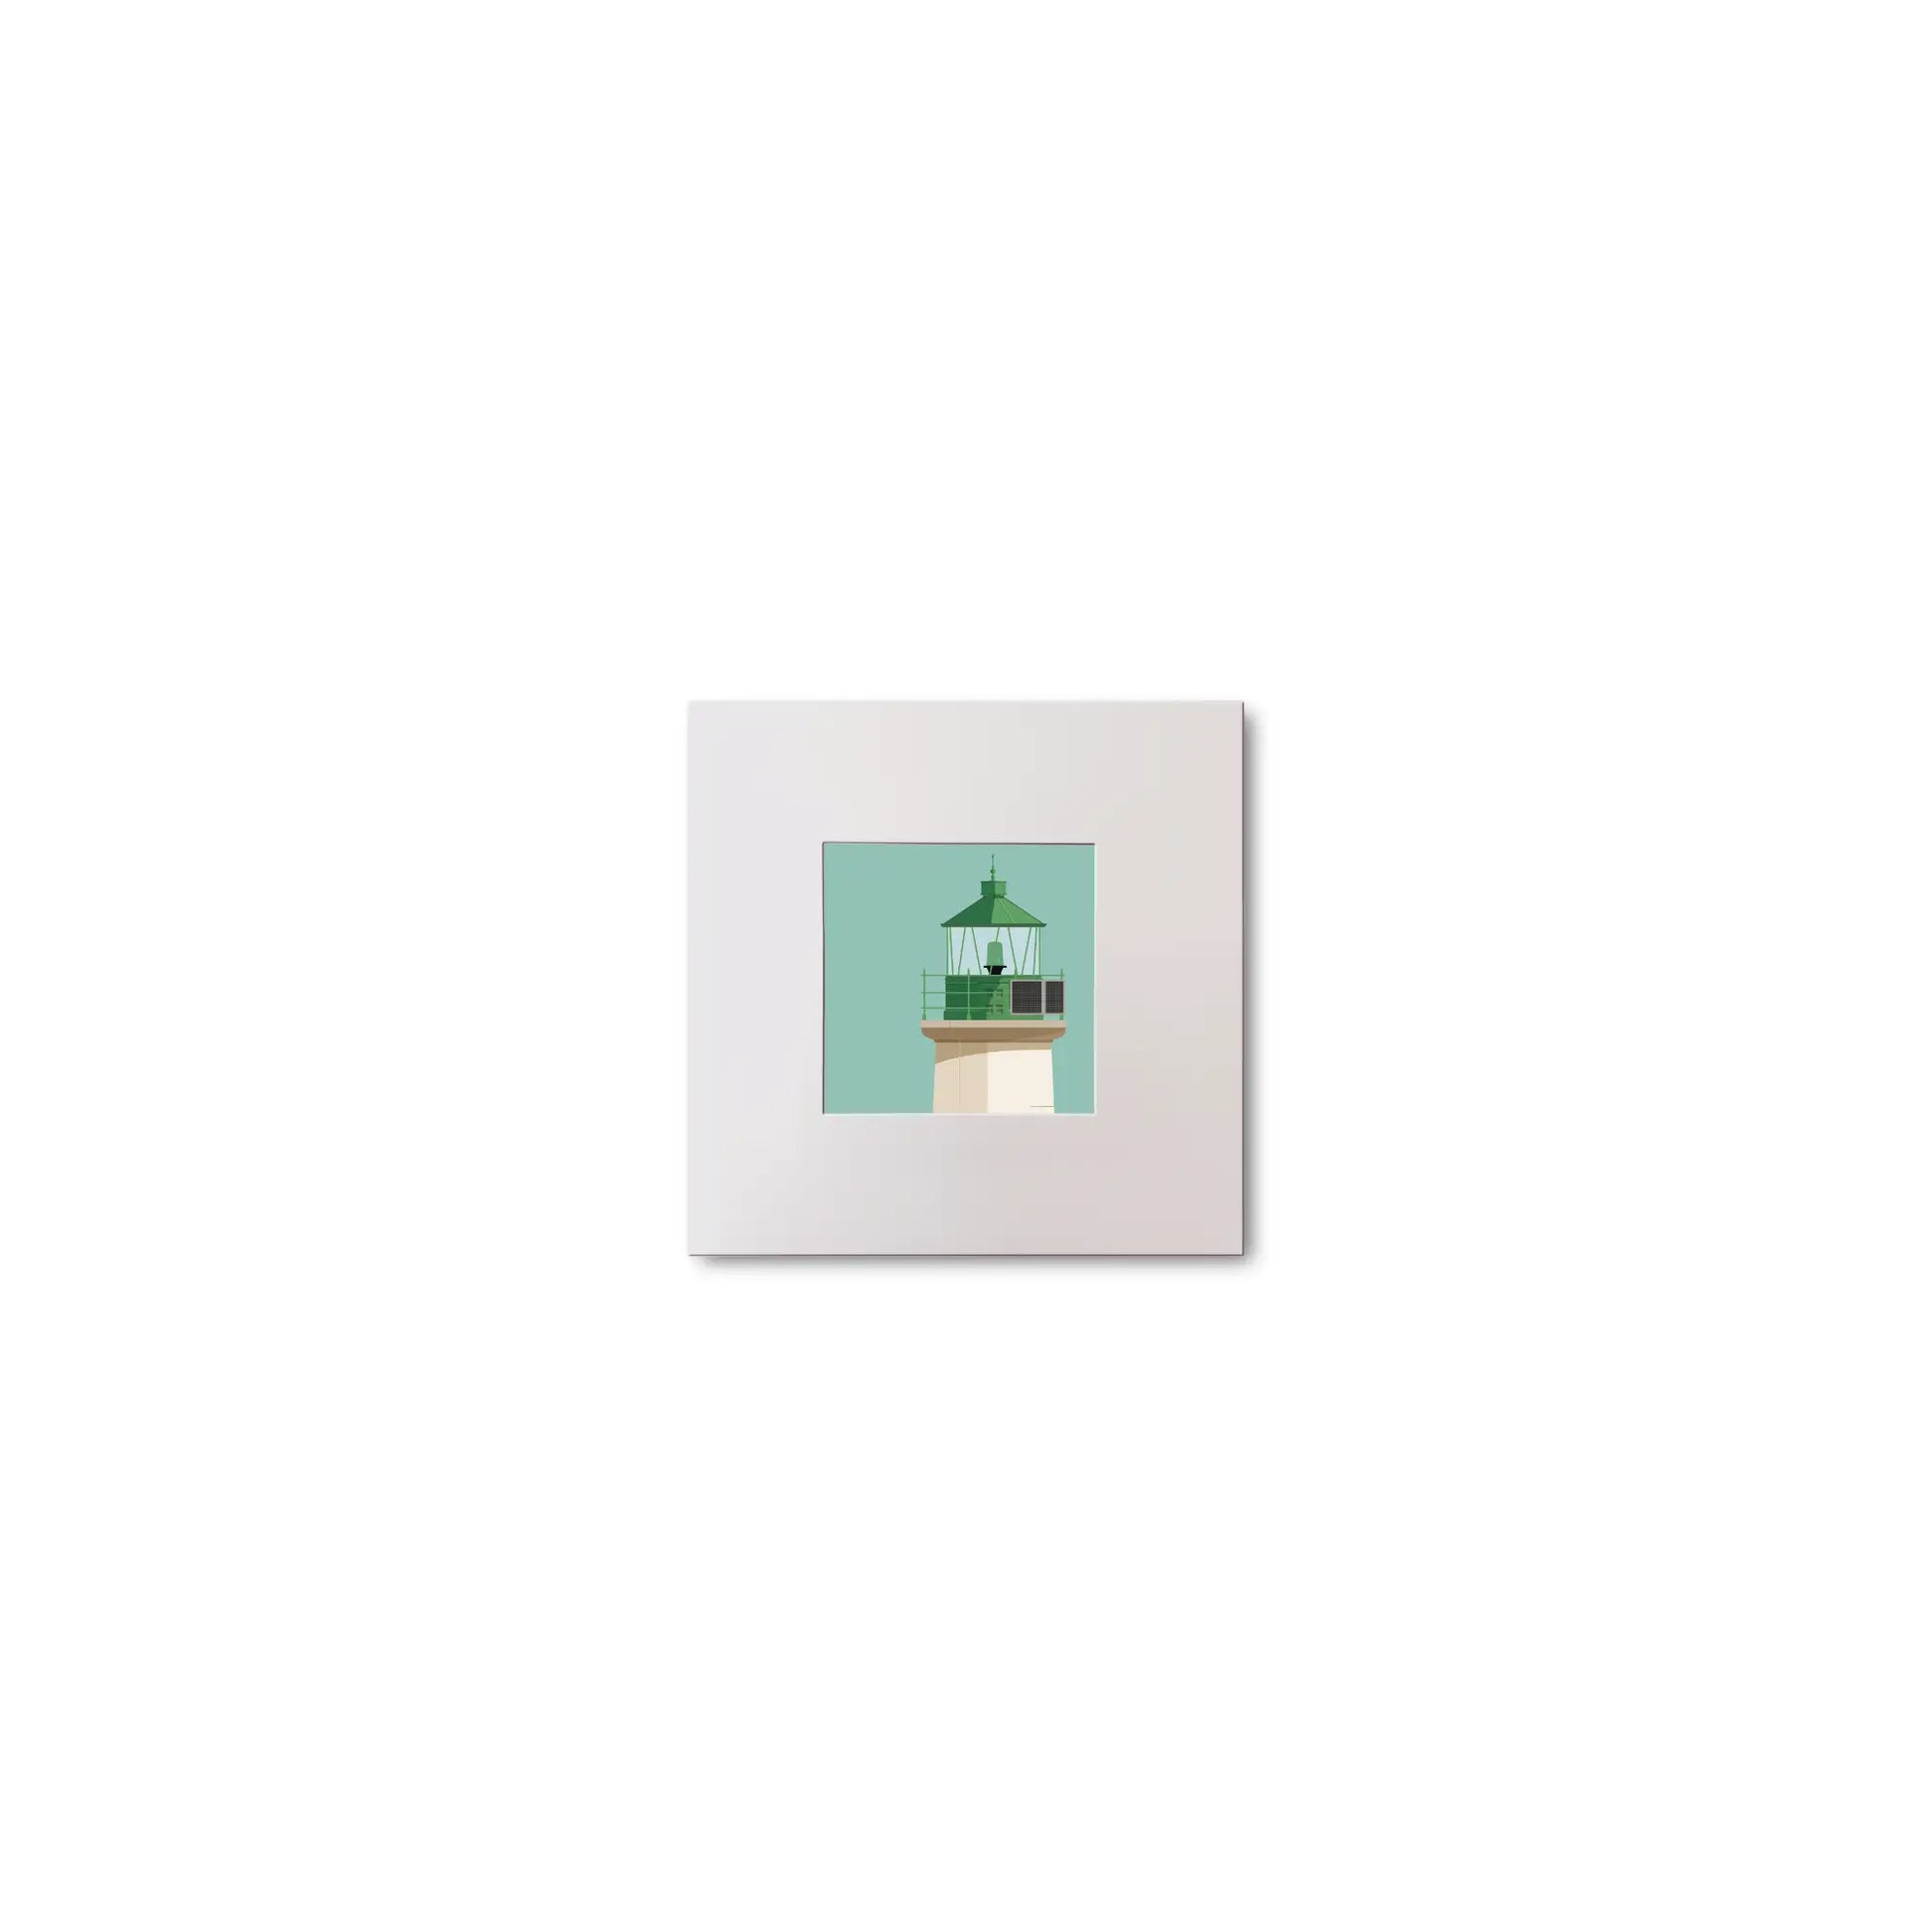 Illustration of Dún Laoghaire West lighthouse on an ocean green background, mounted and measuring 10x10cm.